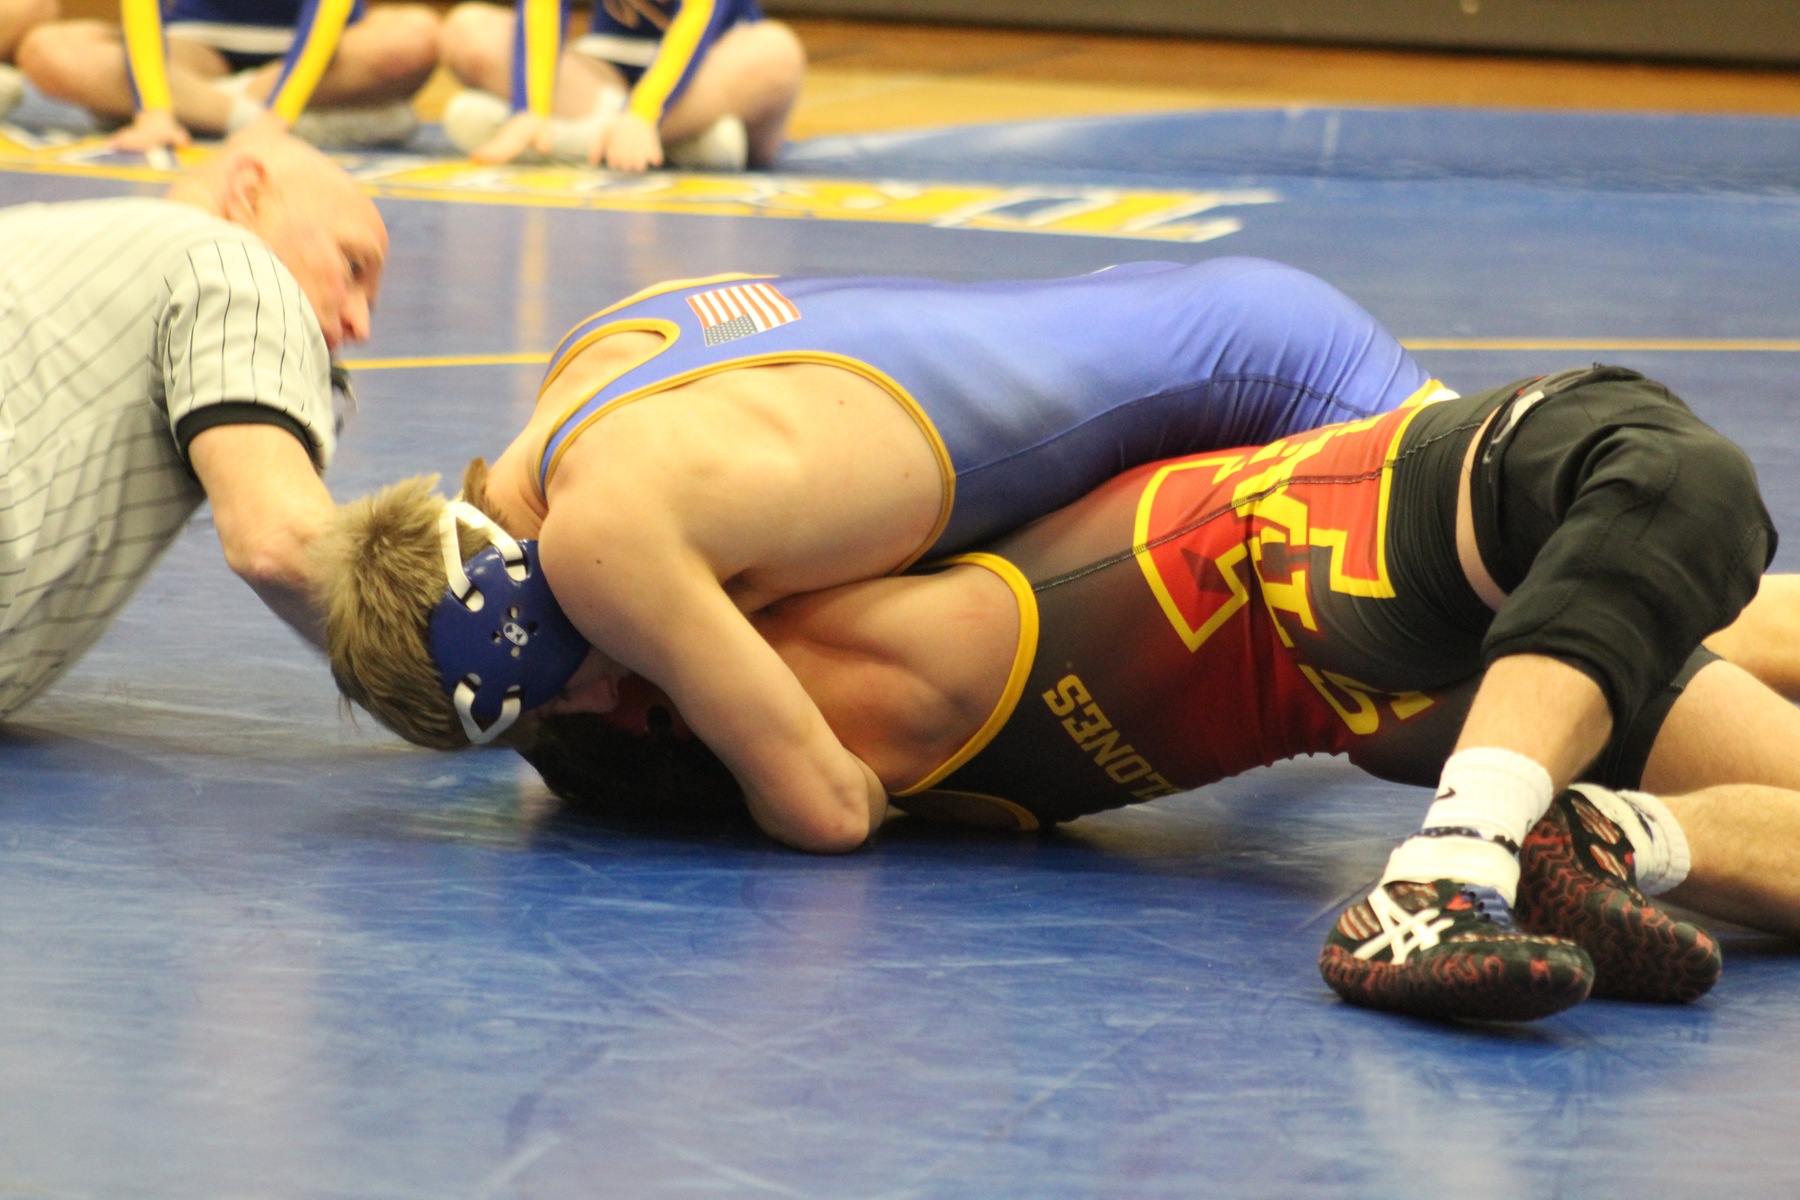 NIACC's Austin Anderly works for the fall against Iowa State's Sam Reyant in their 141-pound match Tuesday in the NIACC gym.